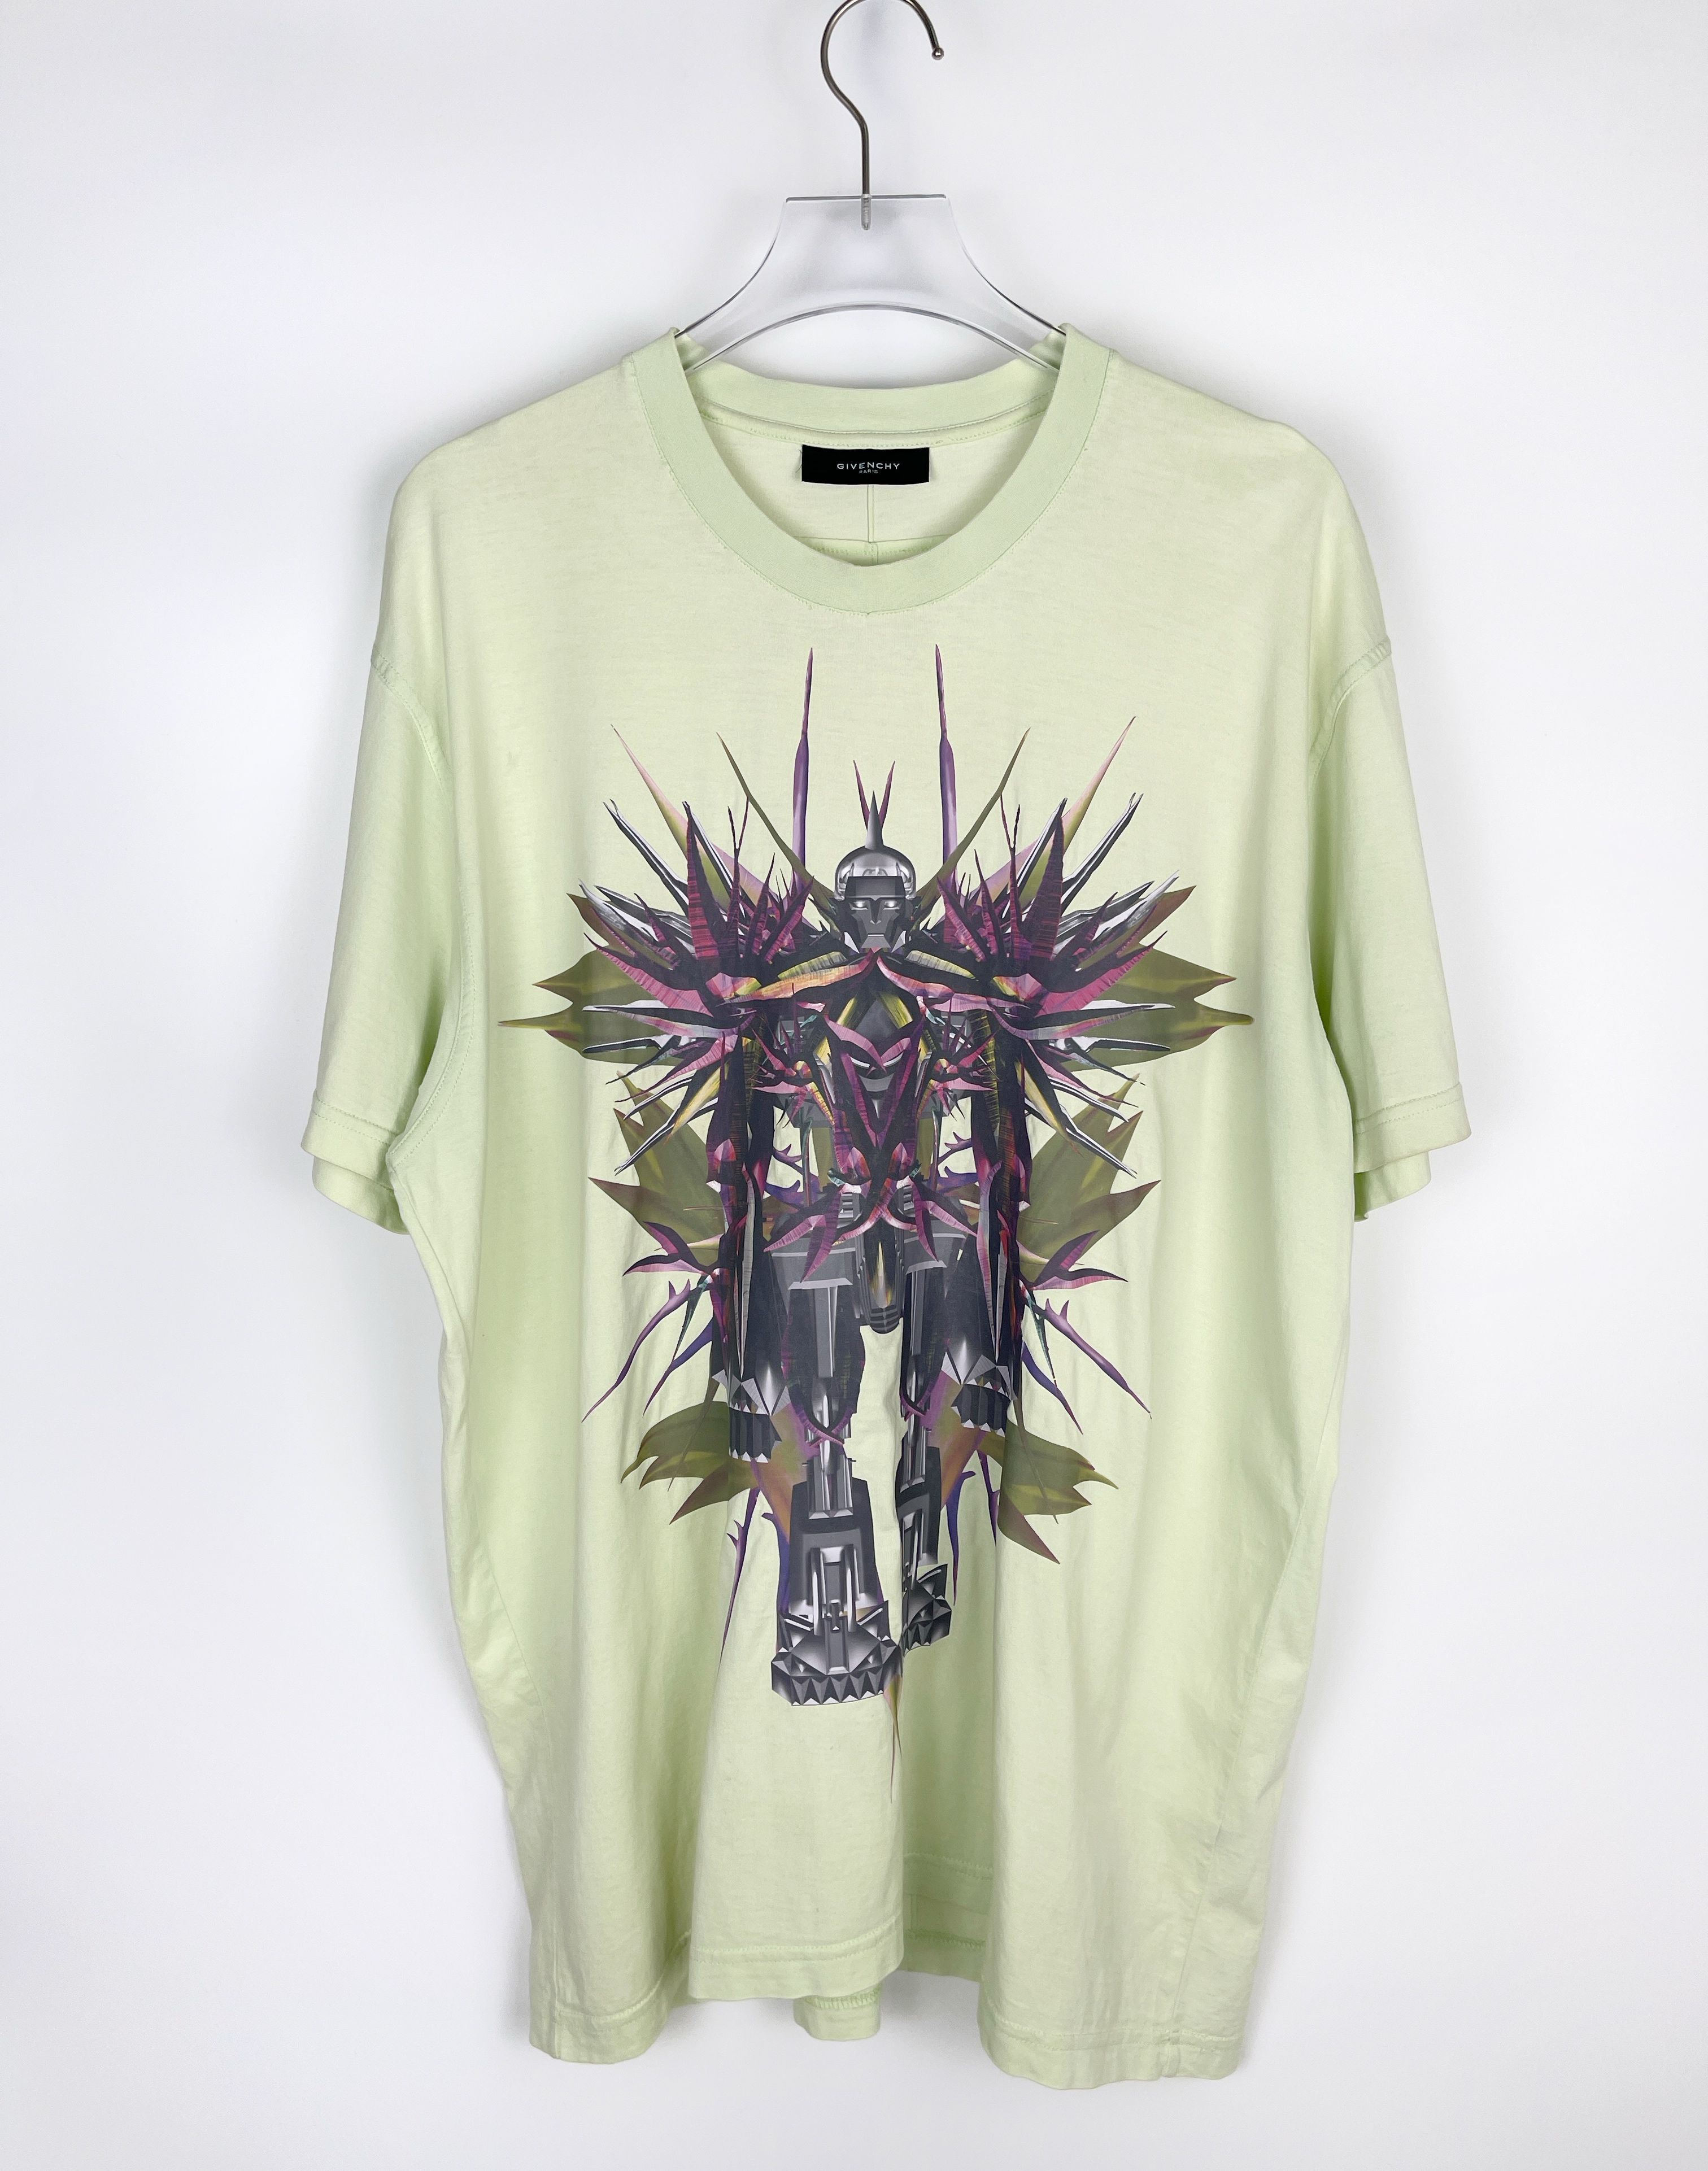 Givenchy Givenchy S/S2012 "Birds Of Paradise" Robot T-Shirt Size US M / EU 48-50 / 2 - 1 Preview